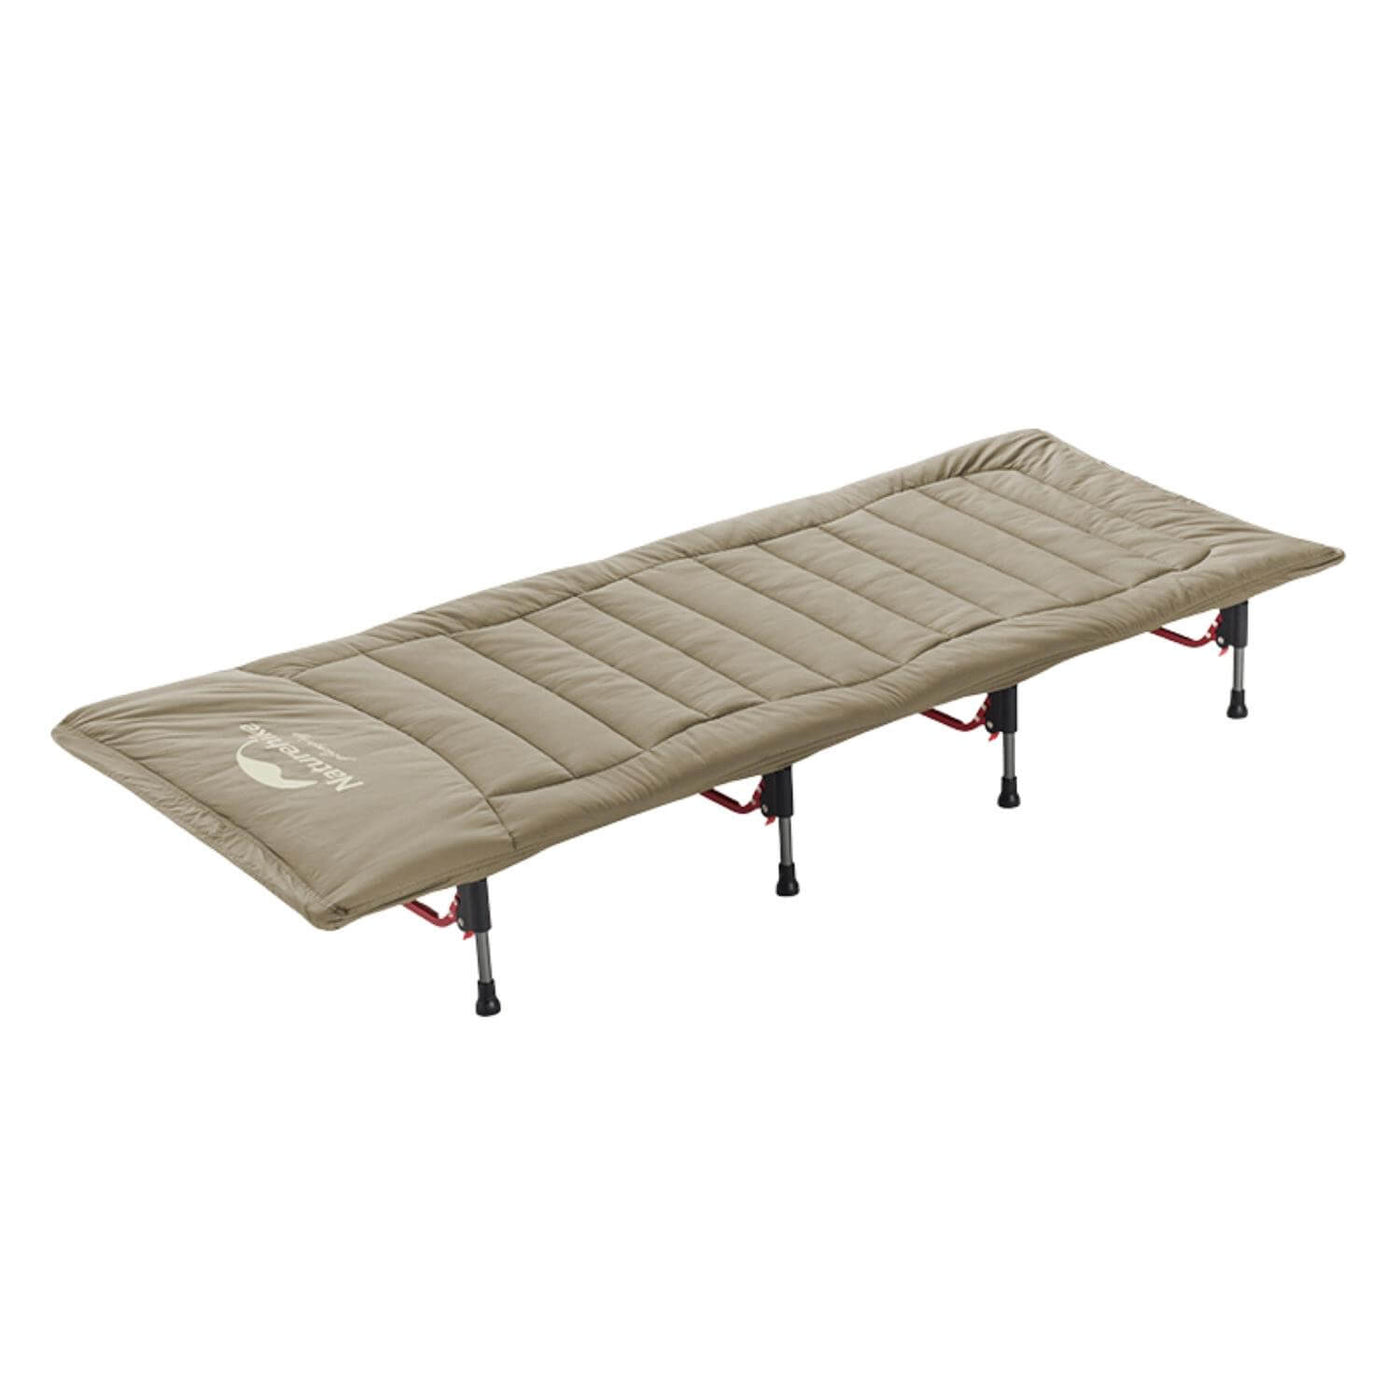 Cotton mattress for camping bed